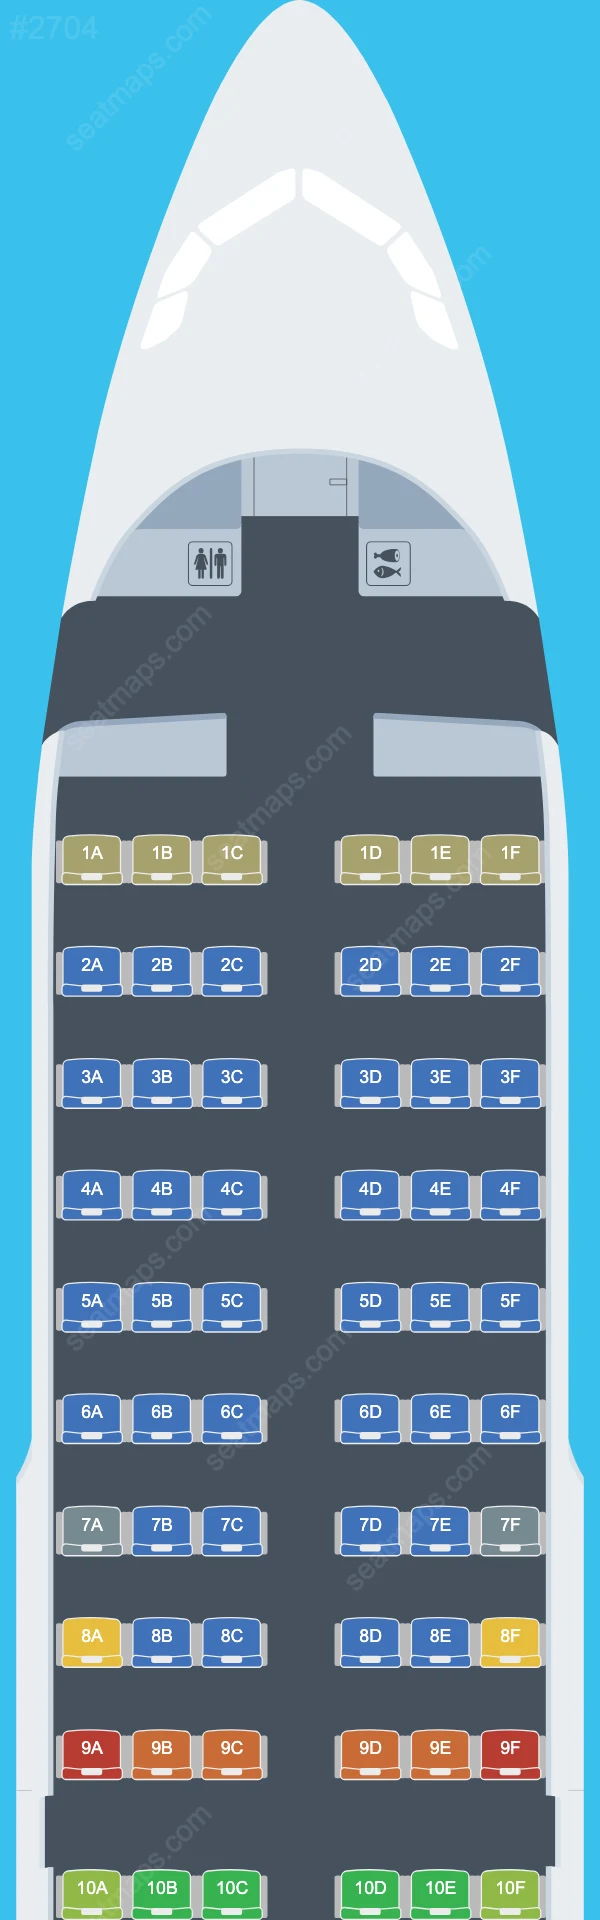 LATAM Airlines Airbus A319 aircraft seat map  A319-100